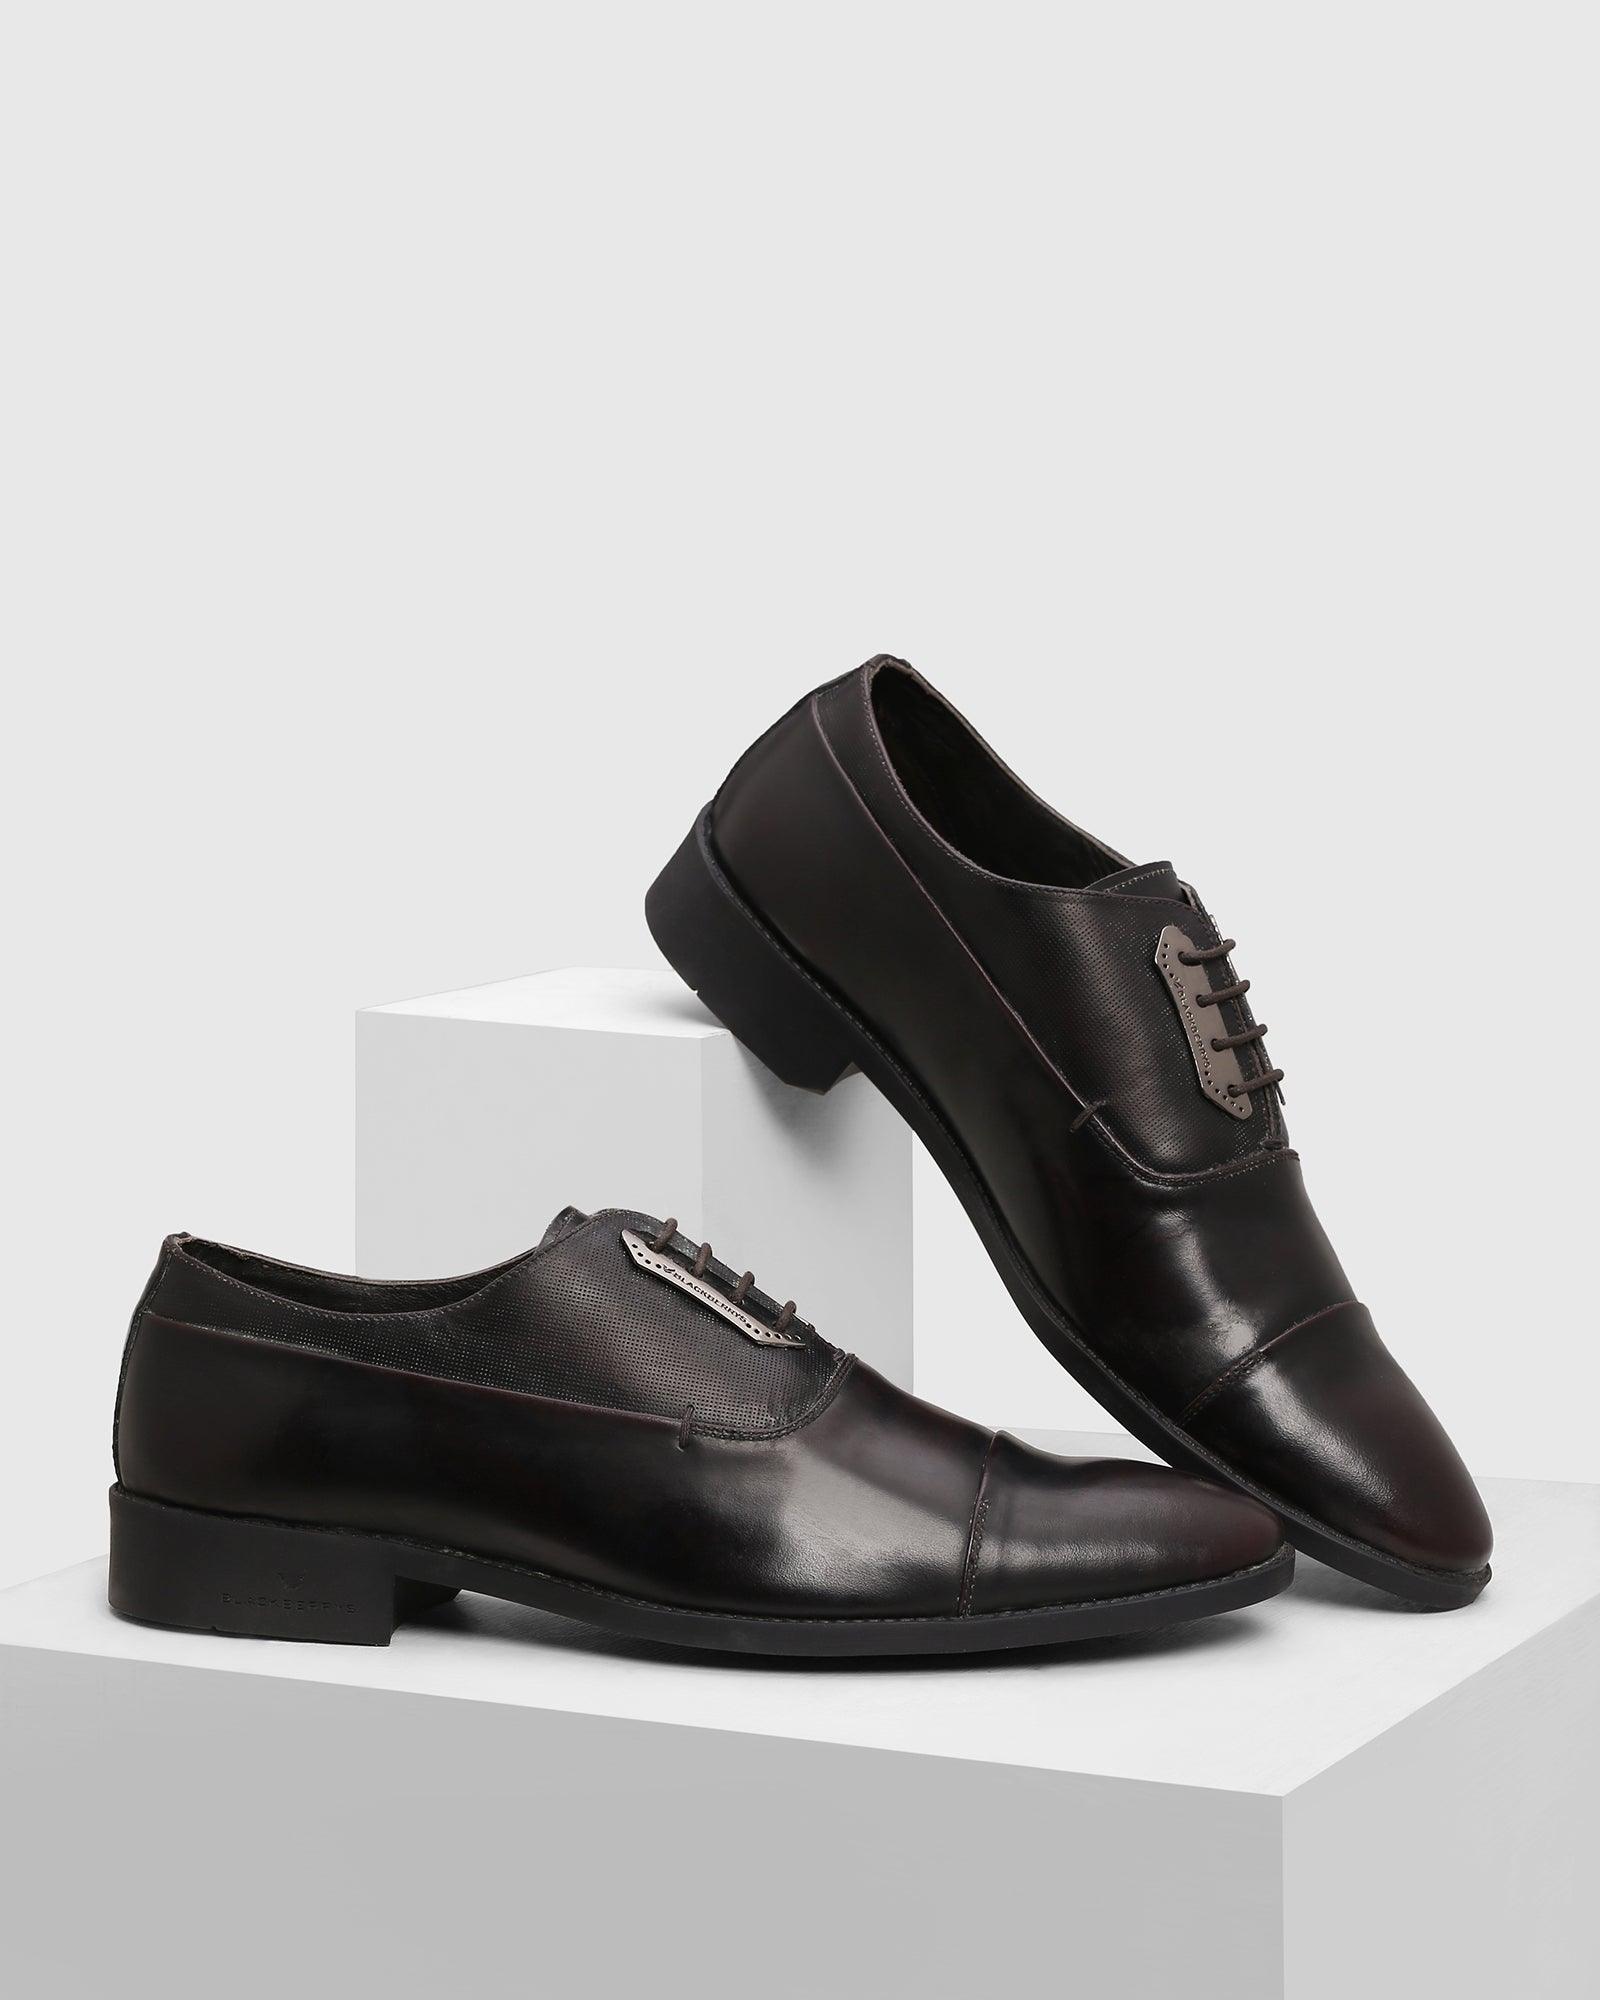 Leather Formal Burgandy Solid Oxford Shoes - Pronel